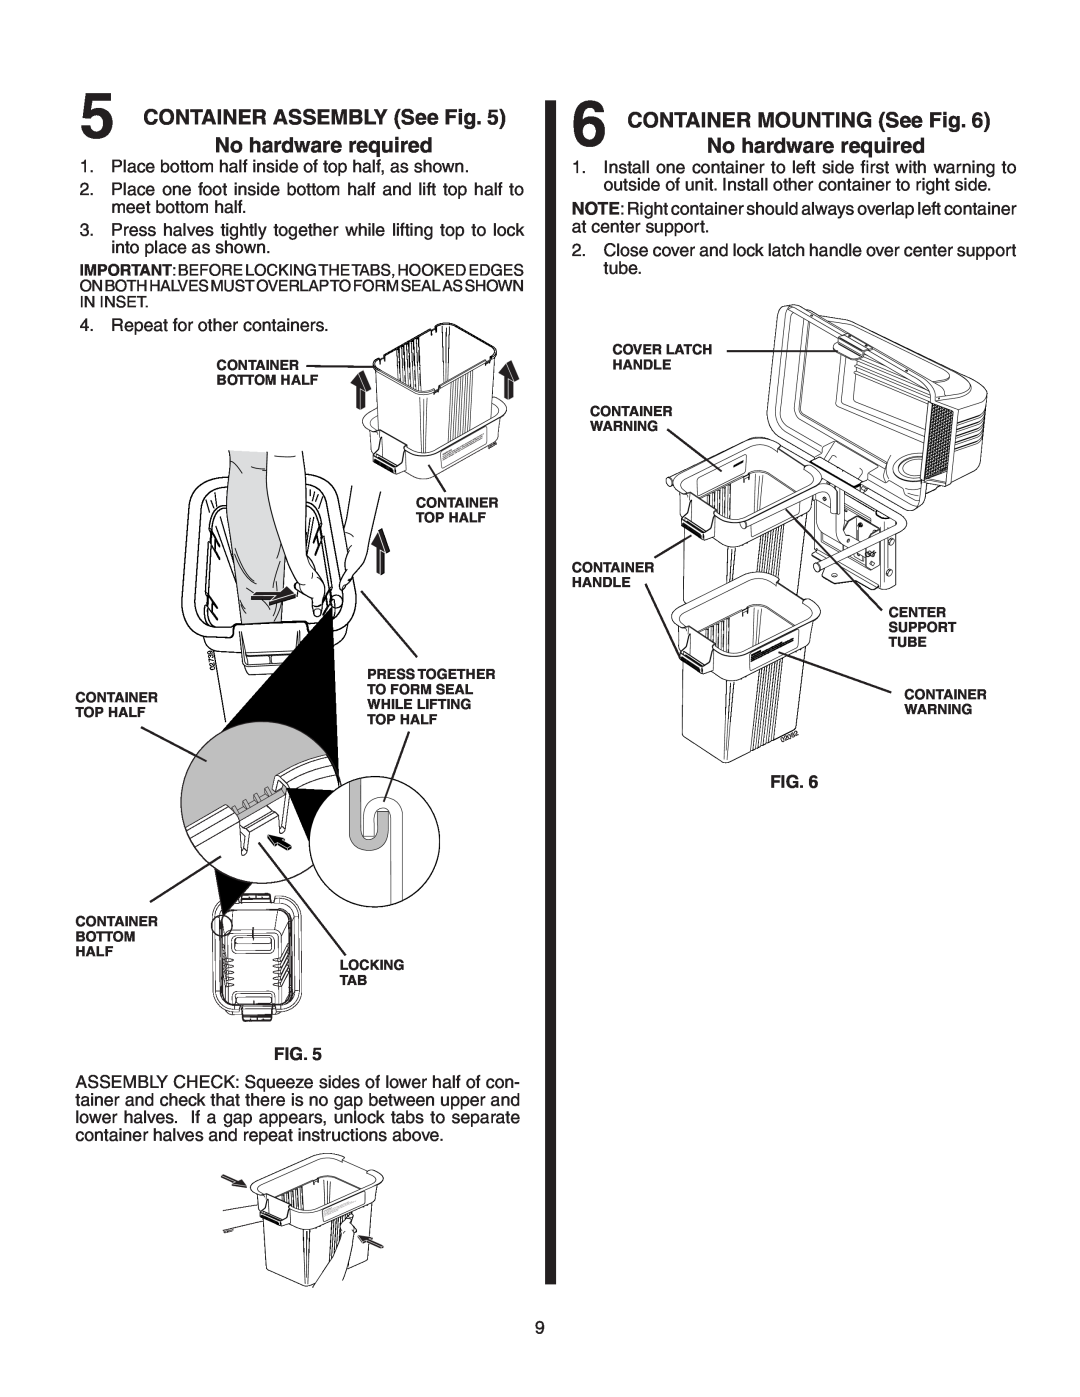 Poulan CL46B, 954 04 06-06, 156239 owner manual CONTAINER ASSEMBLY See Fig, No hardware required, CONTAINER MOUNTING See Fig 